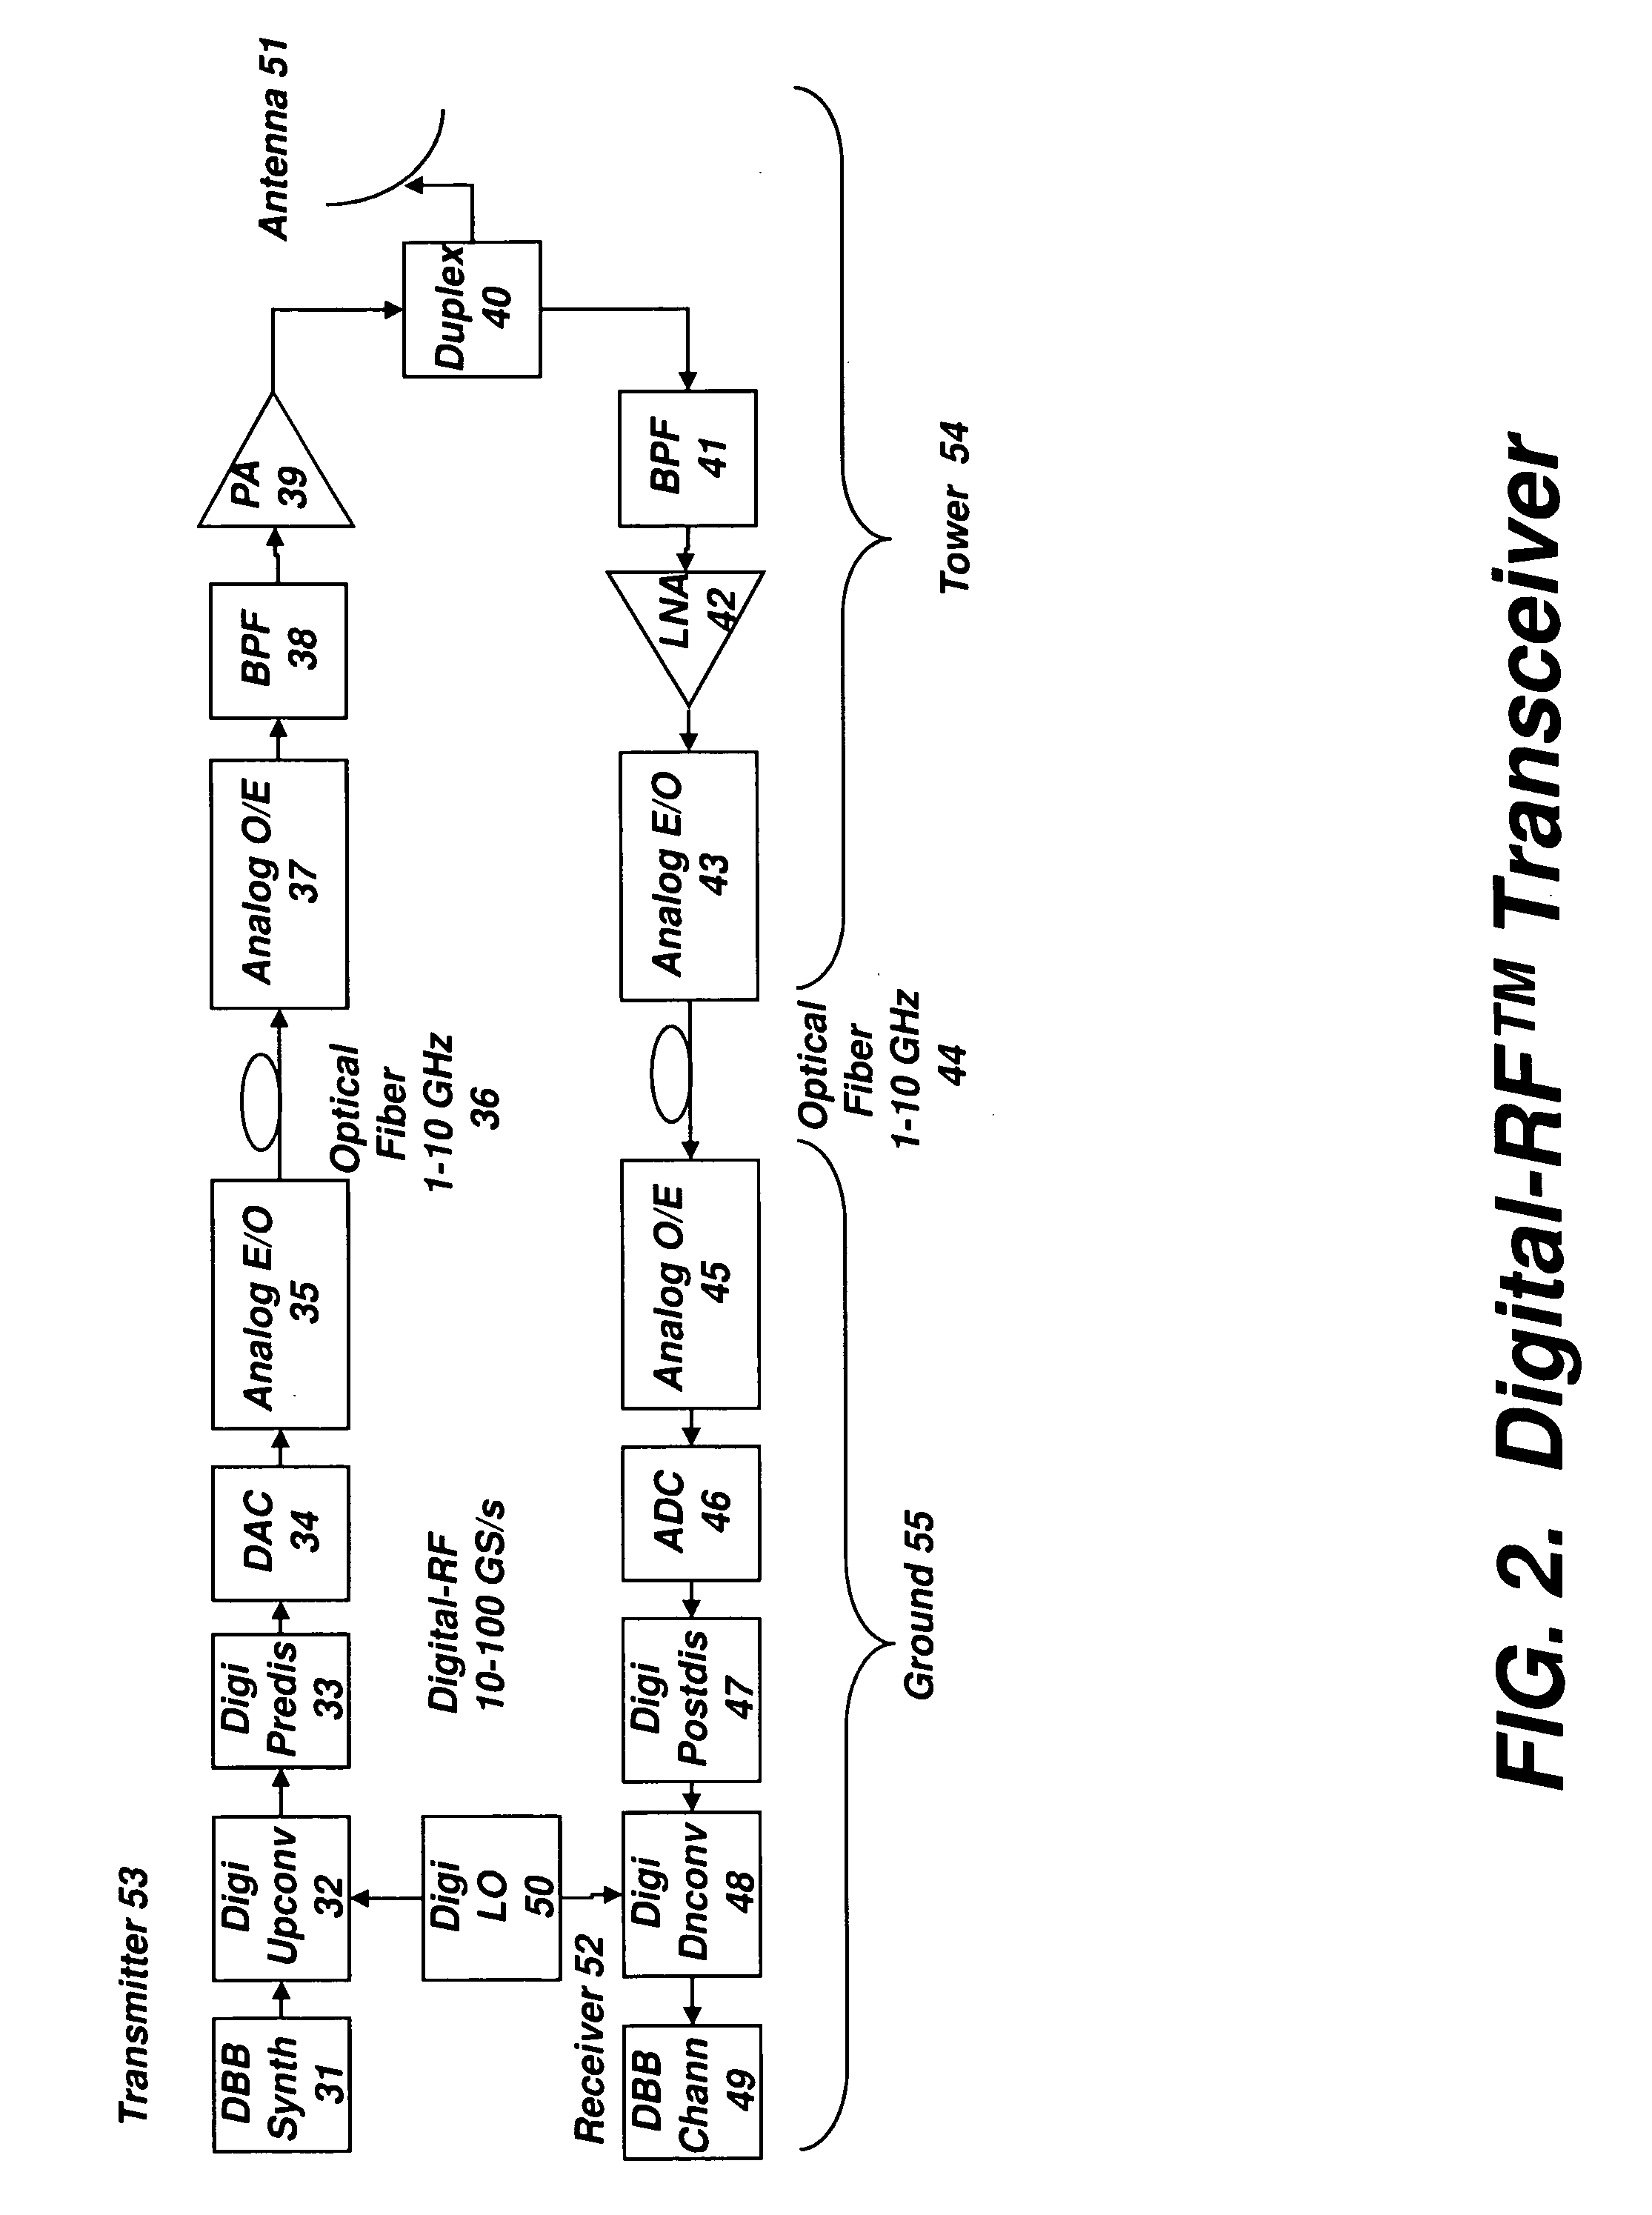 Digital radio frequency tranceiver system and method